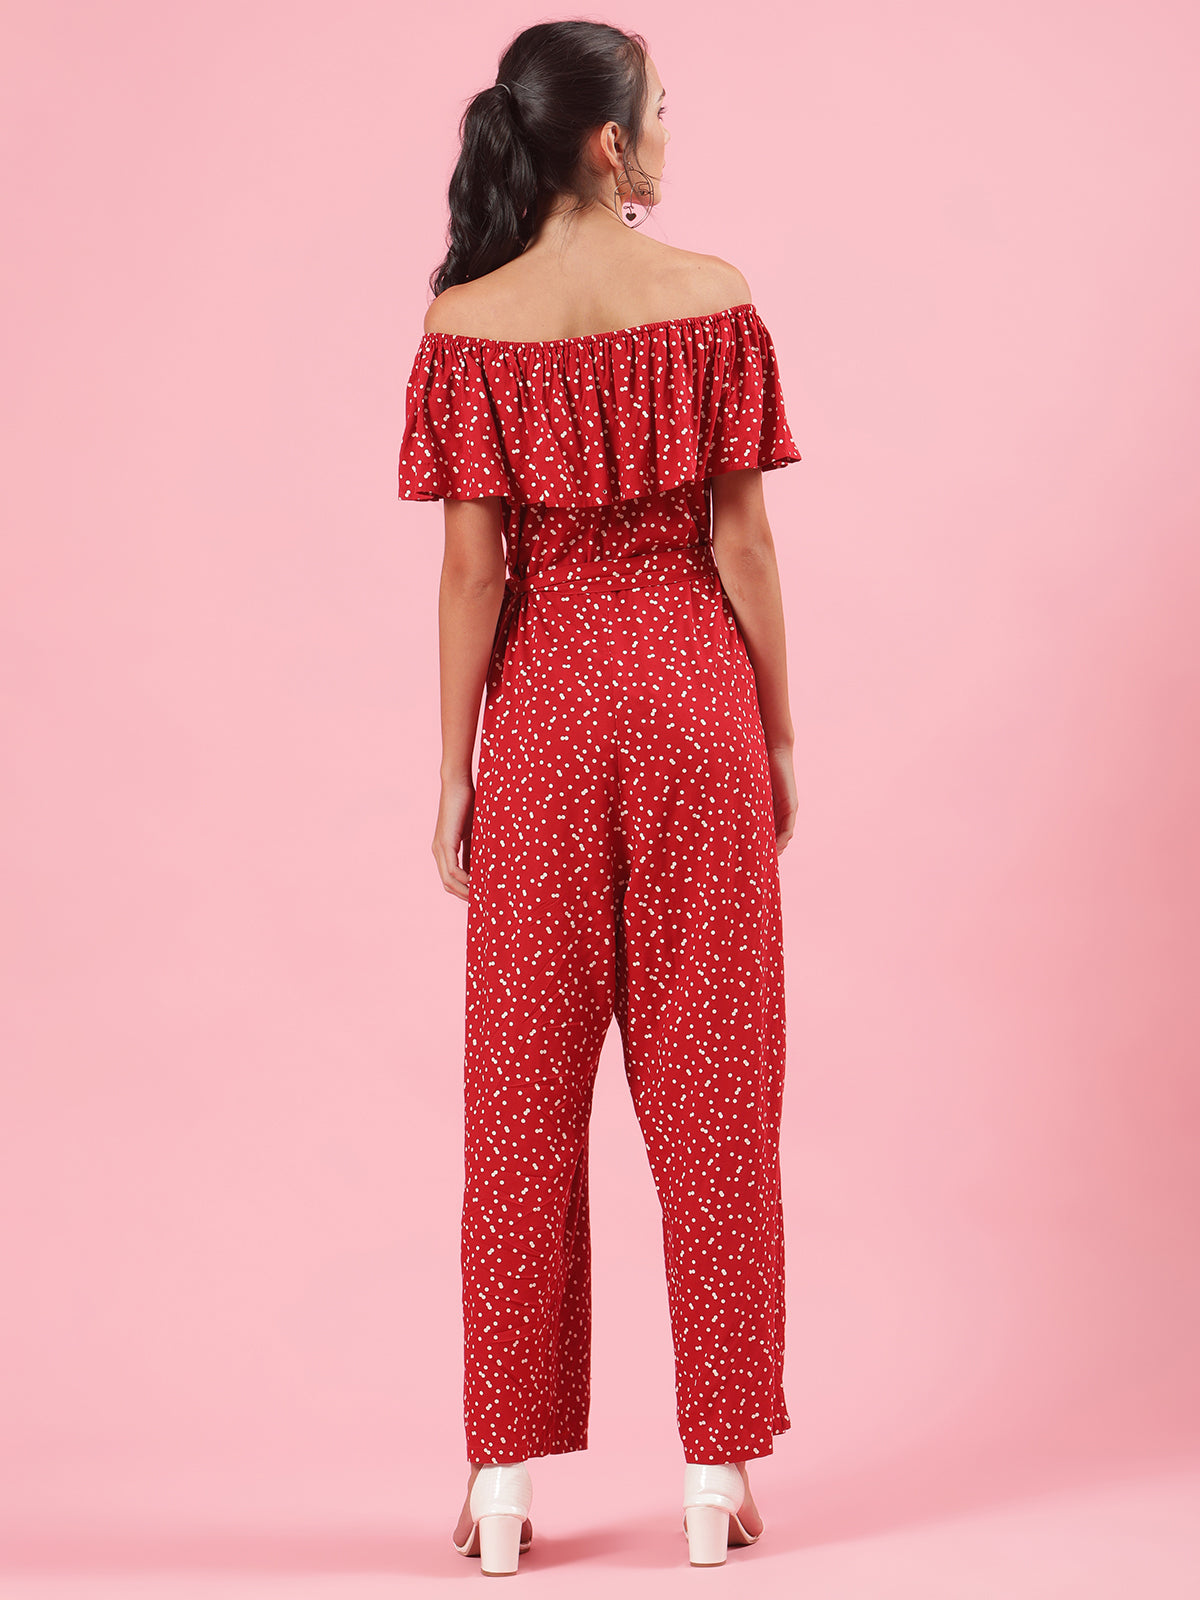 Retro Red Off Shoulder Polka Dot Womens Casual Jumpsuit with Belt